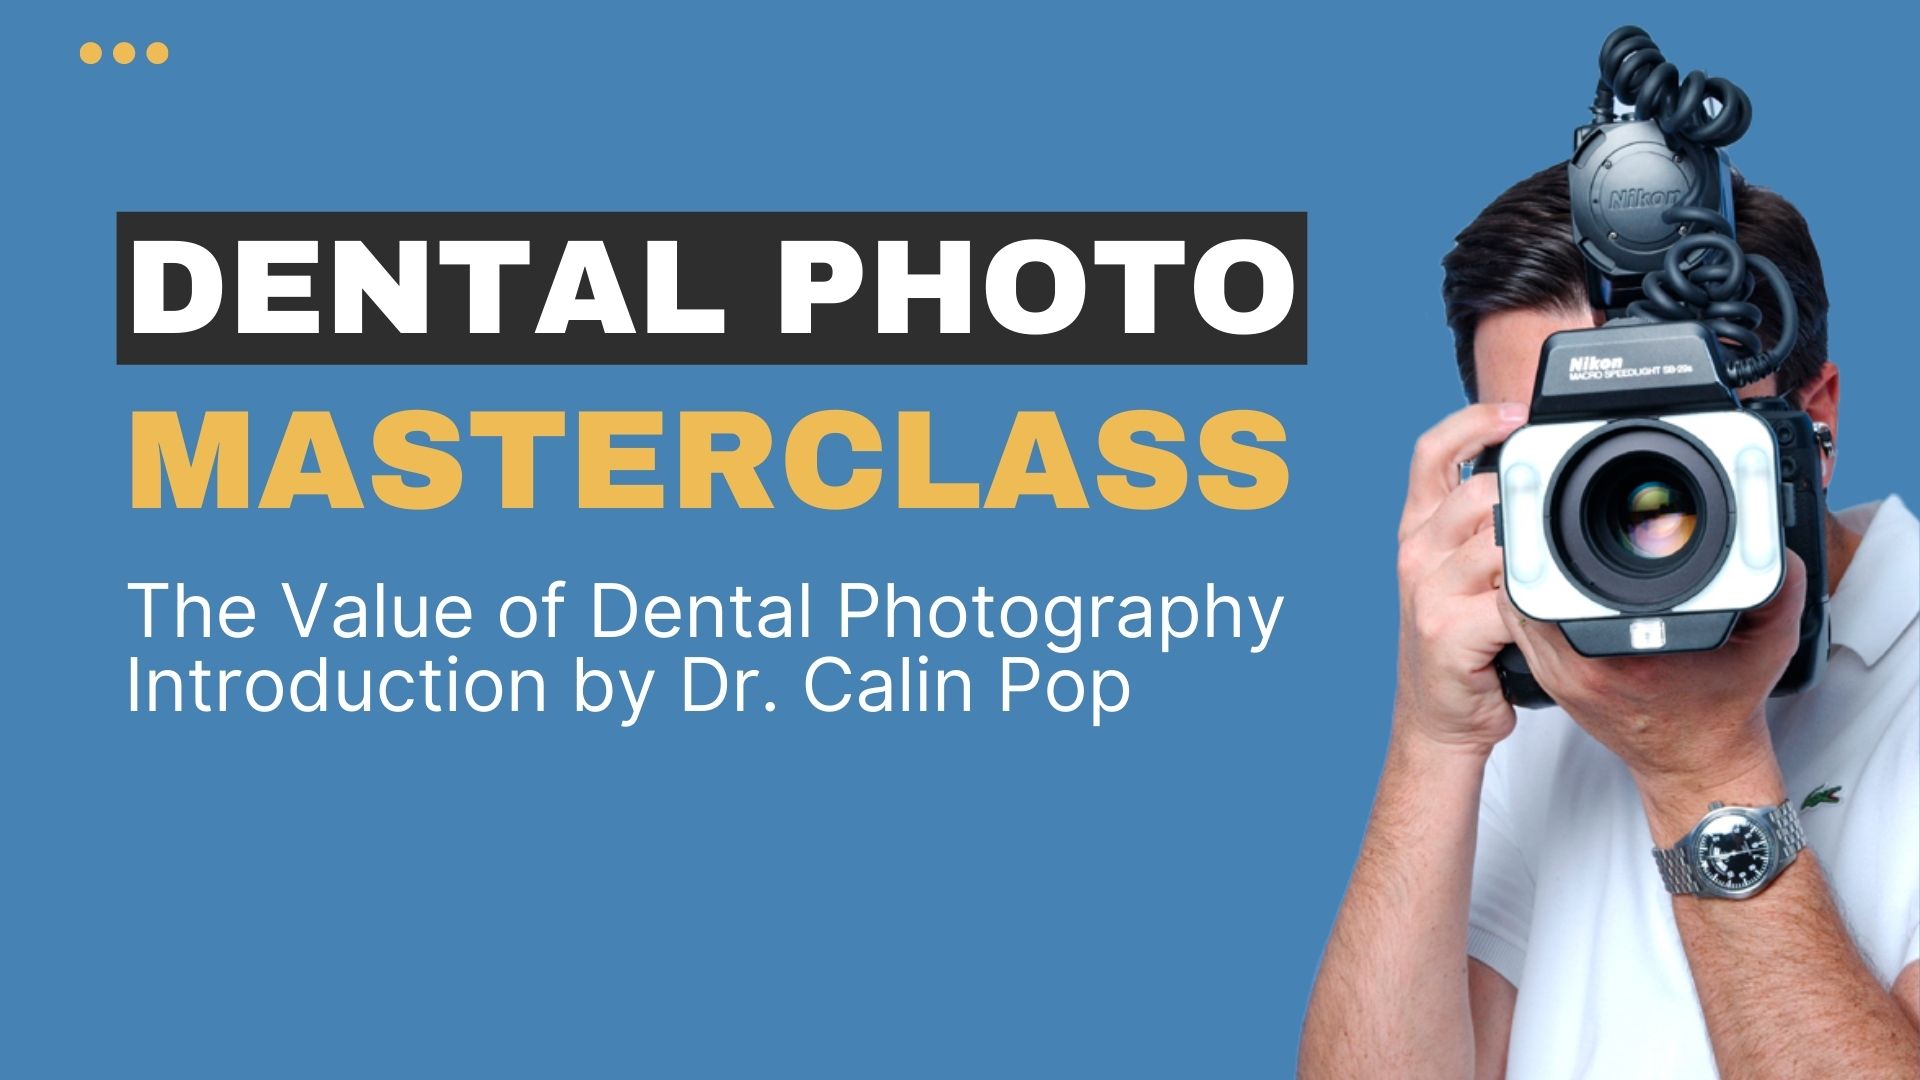 Four Tips for Dental Photography Done Right - Dentistry Today